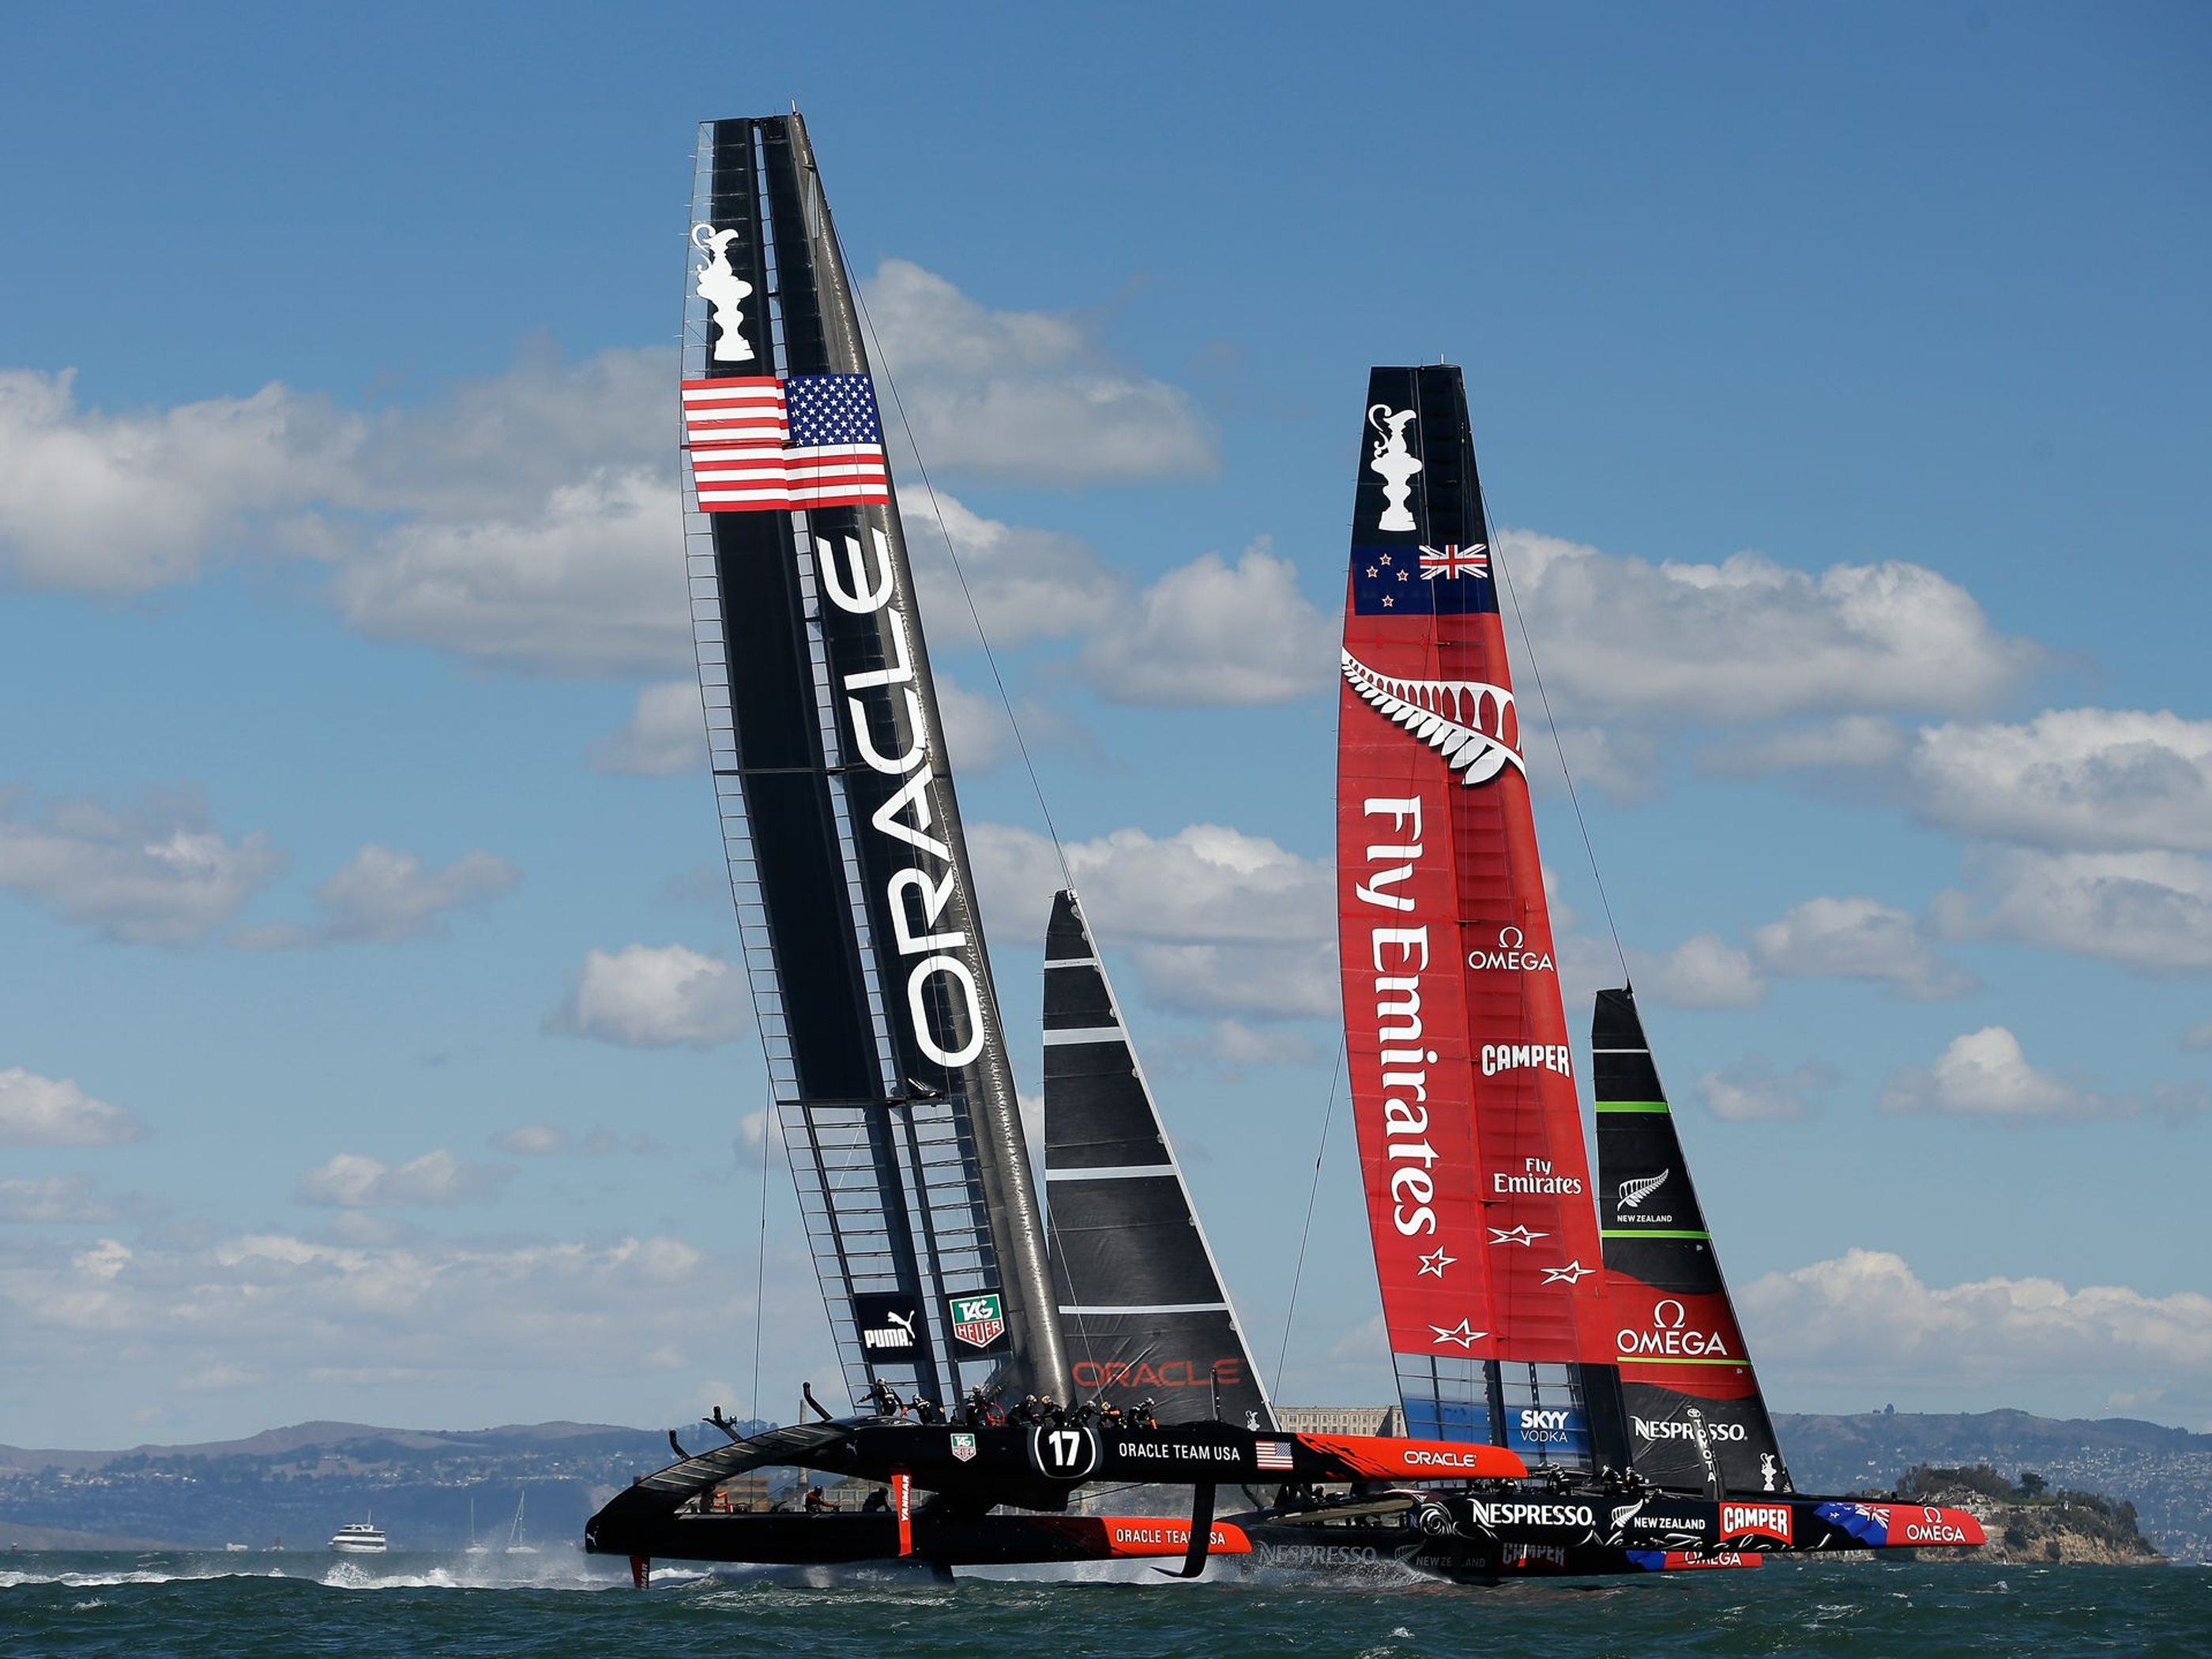 oracle wins highly innovative and controversial america’s cup 2013. – DesignApplause